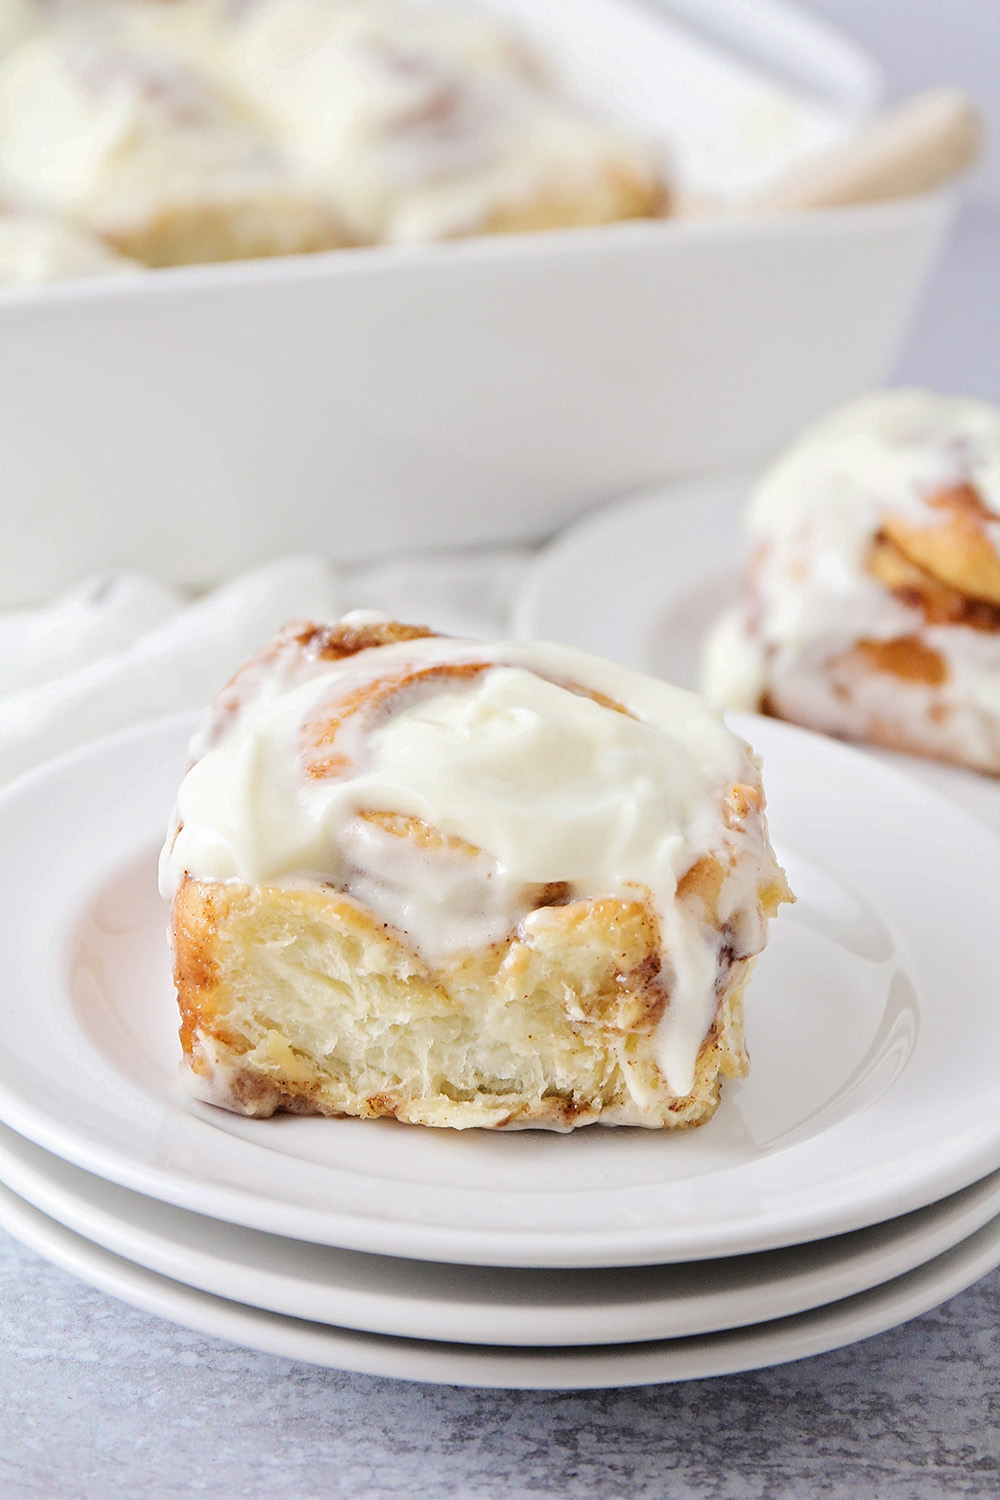 These delicious cinnamon rolls are everything you could want in a cinnamon roll! They're so light and fluffy, with a decadent cinnamon filling!